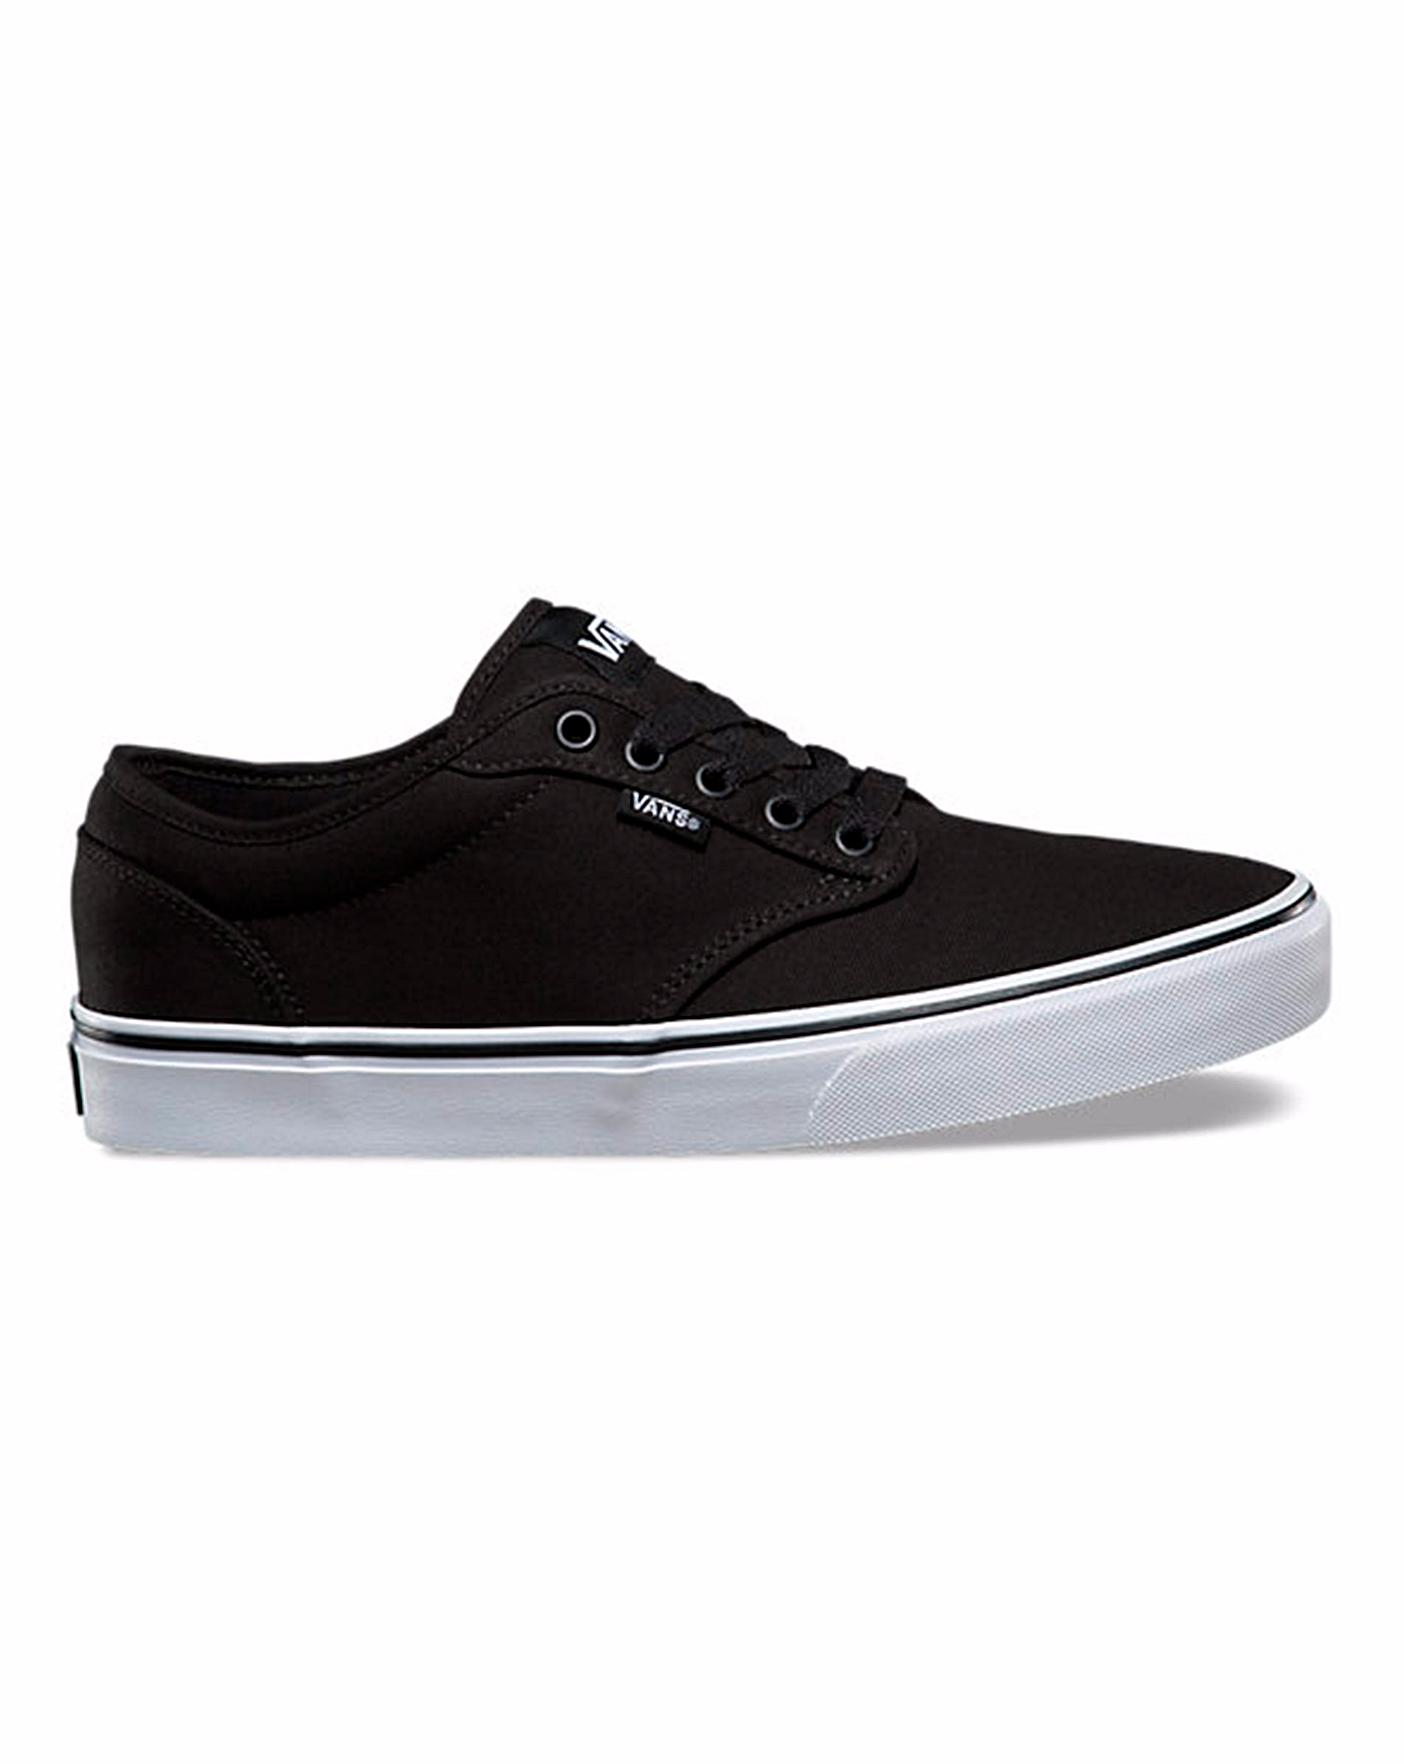 vans atwood mens shoes